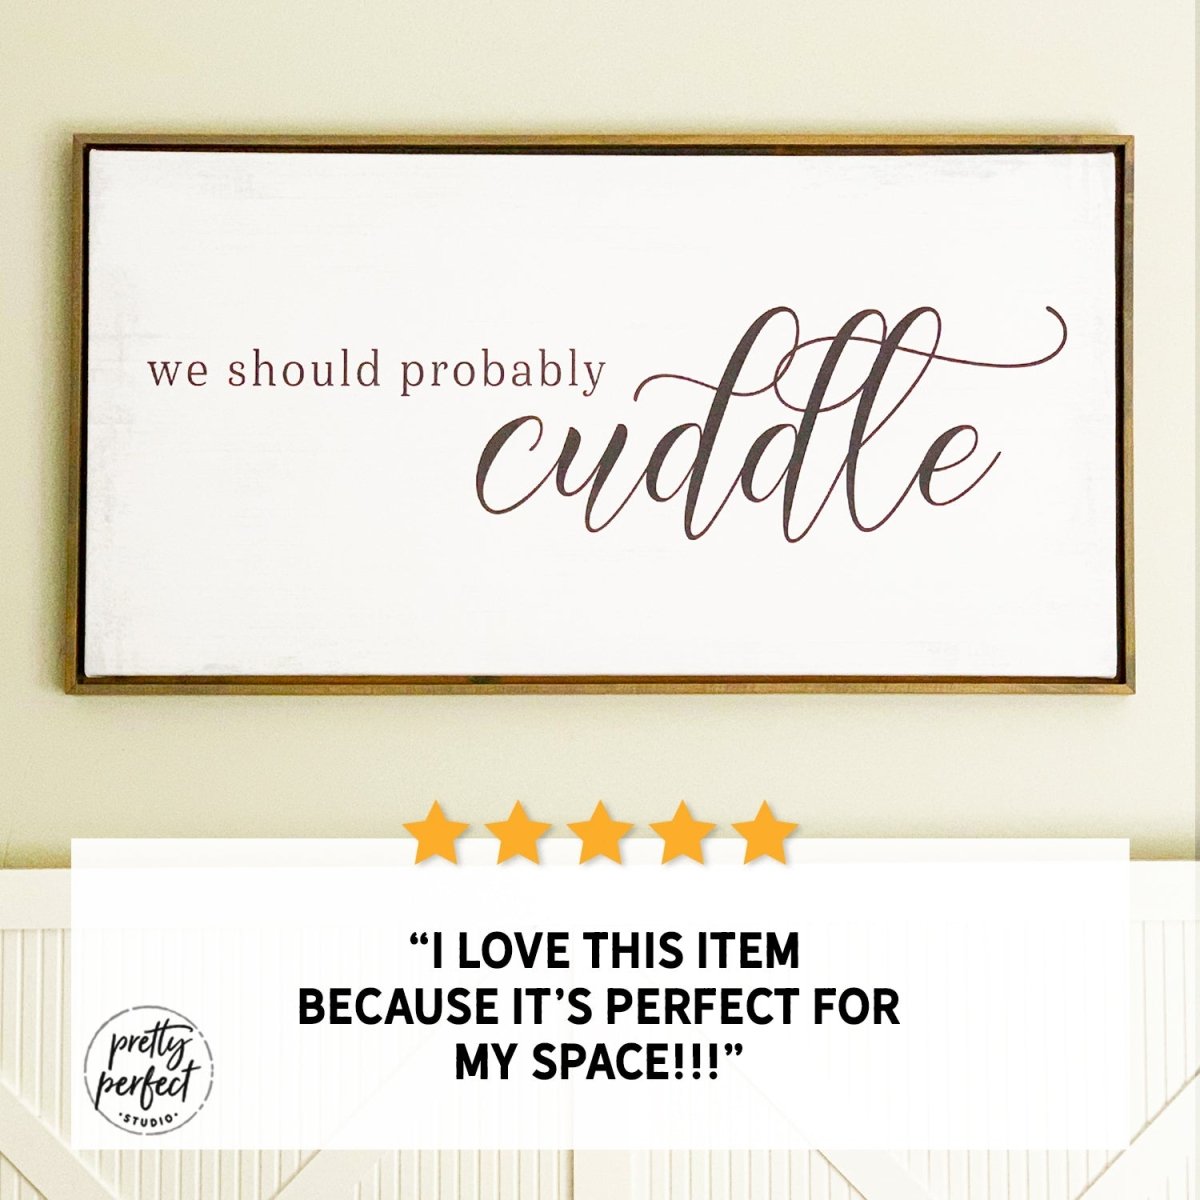 Customer product review for we should probably cuddle sign by Pretty Perfect Studio